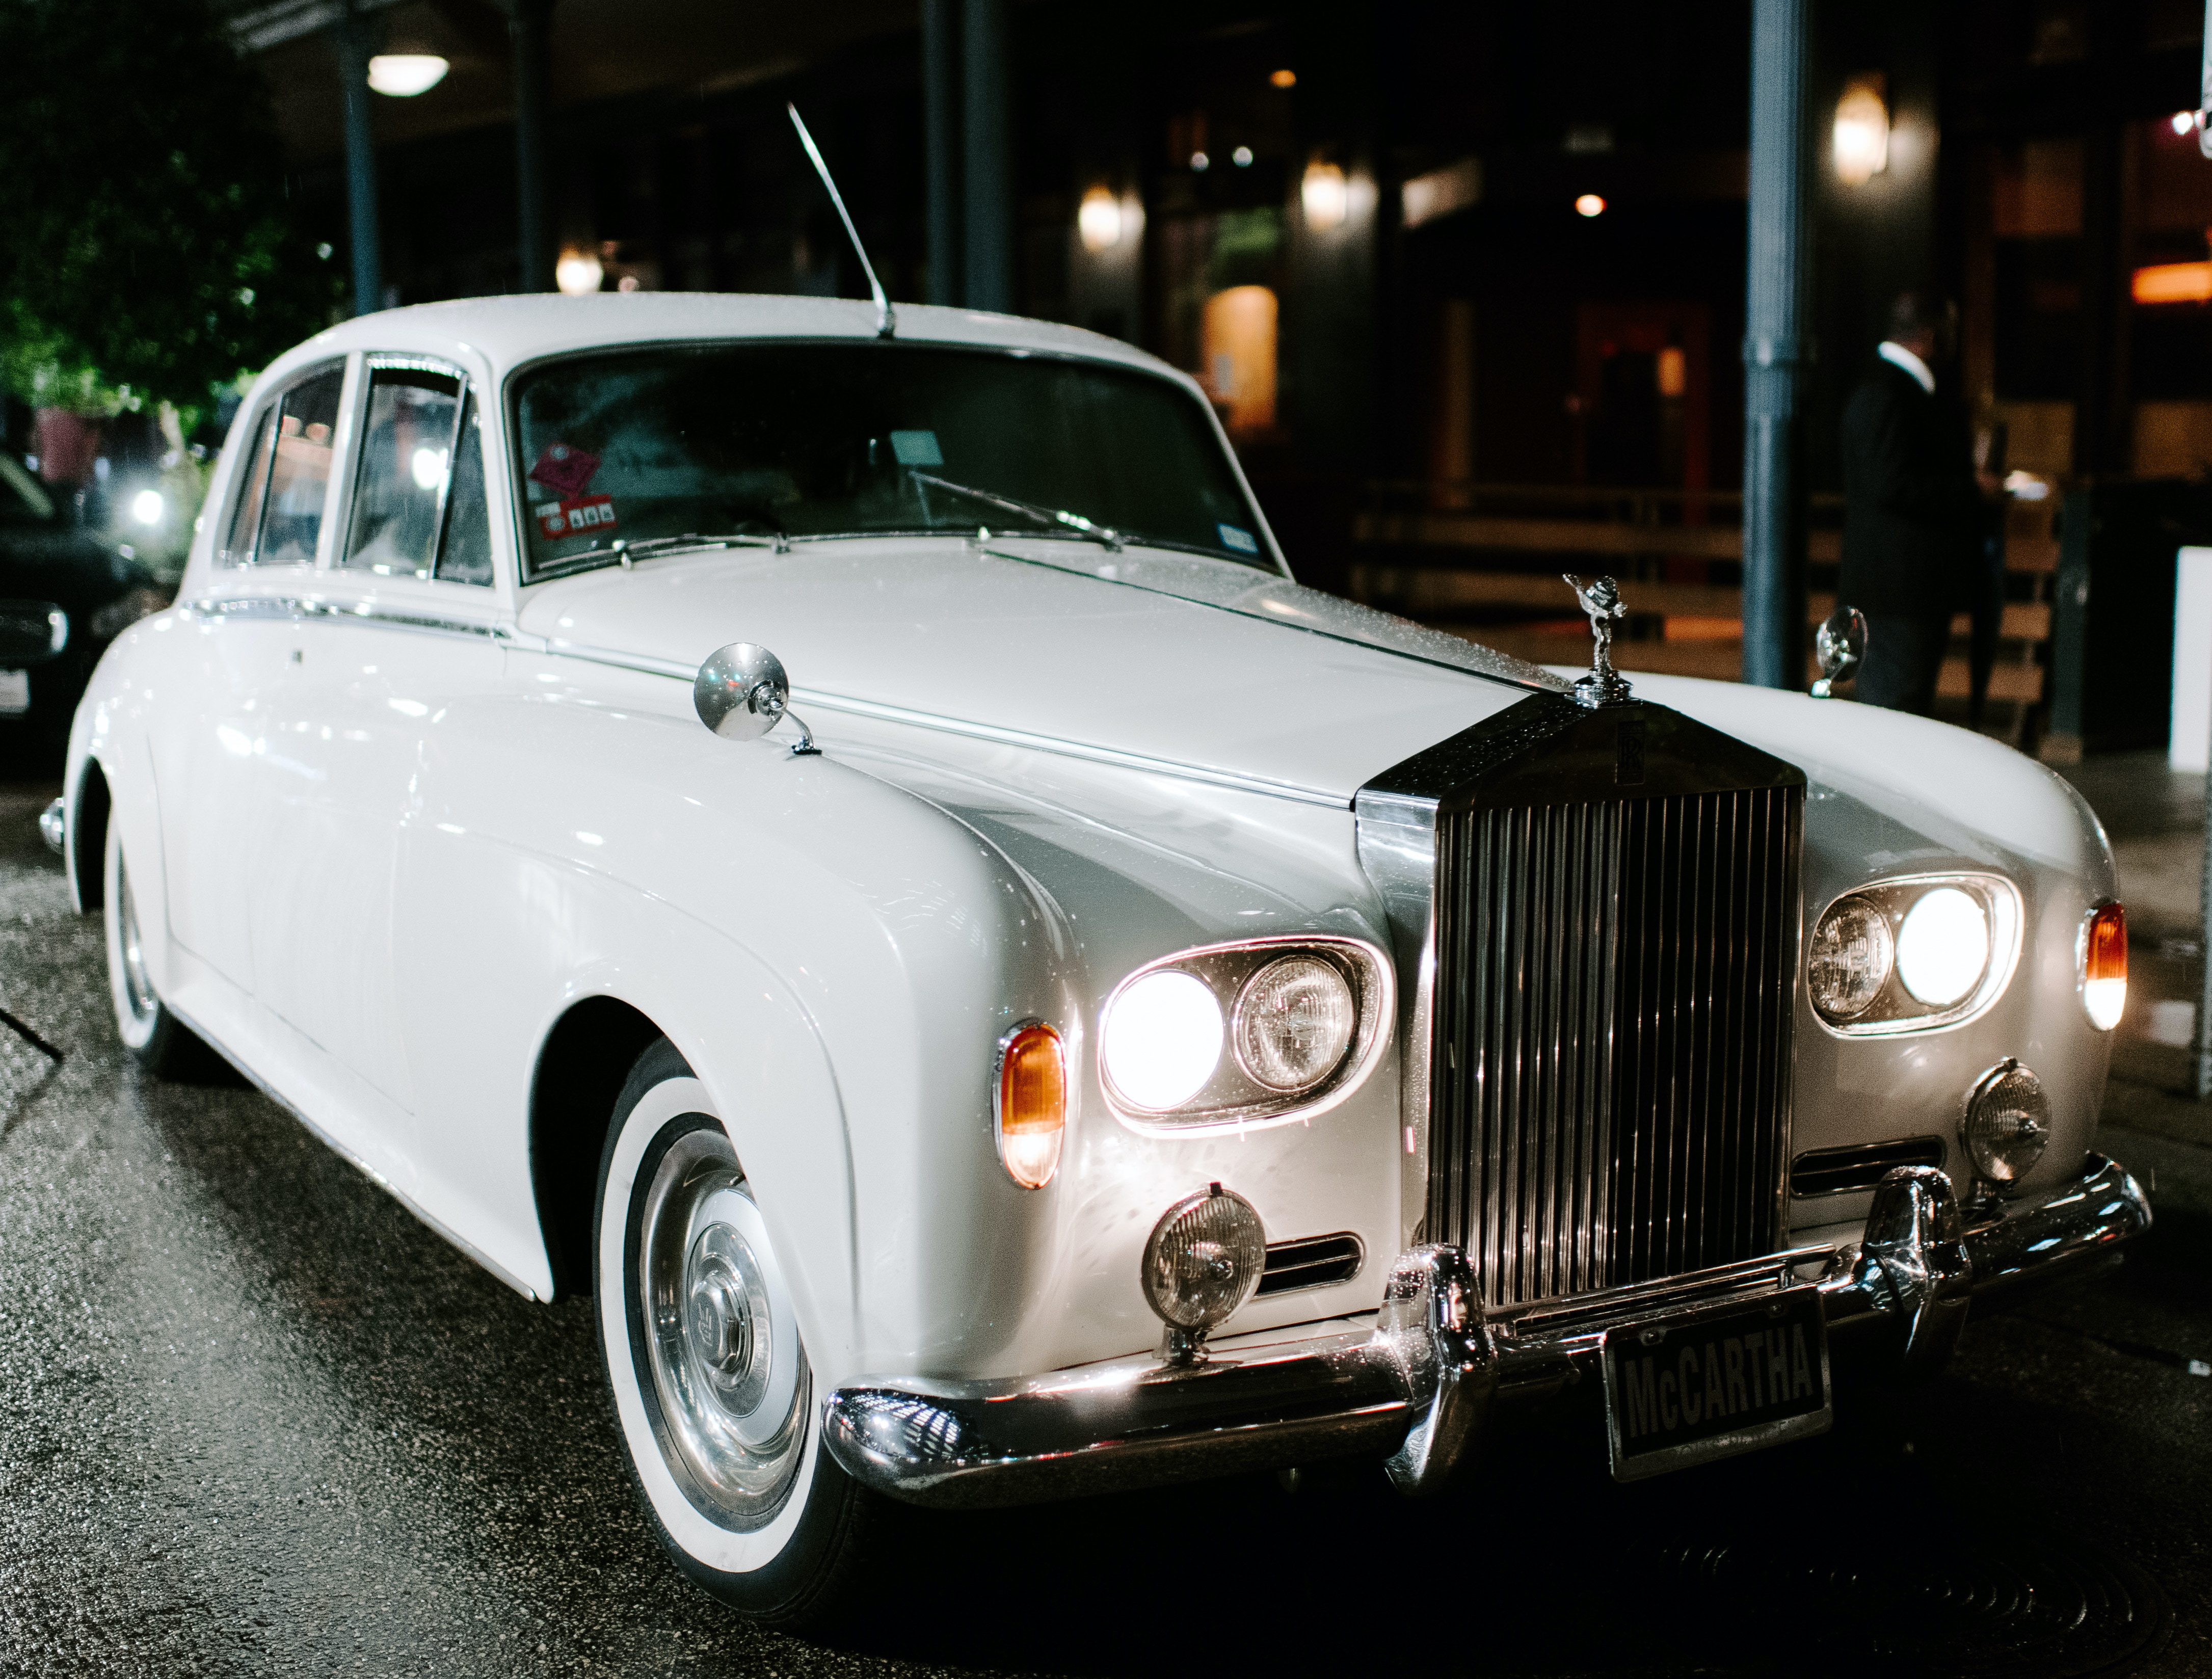 A white Rolls Royce is parked outside for the bride and groom.